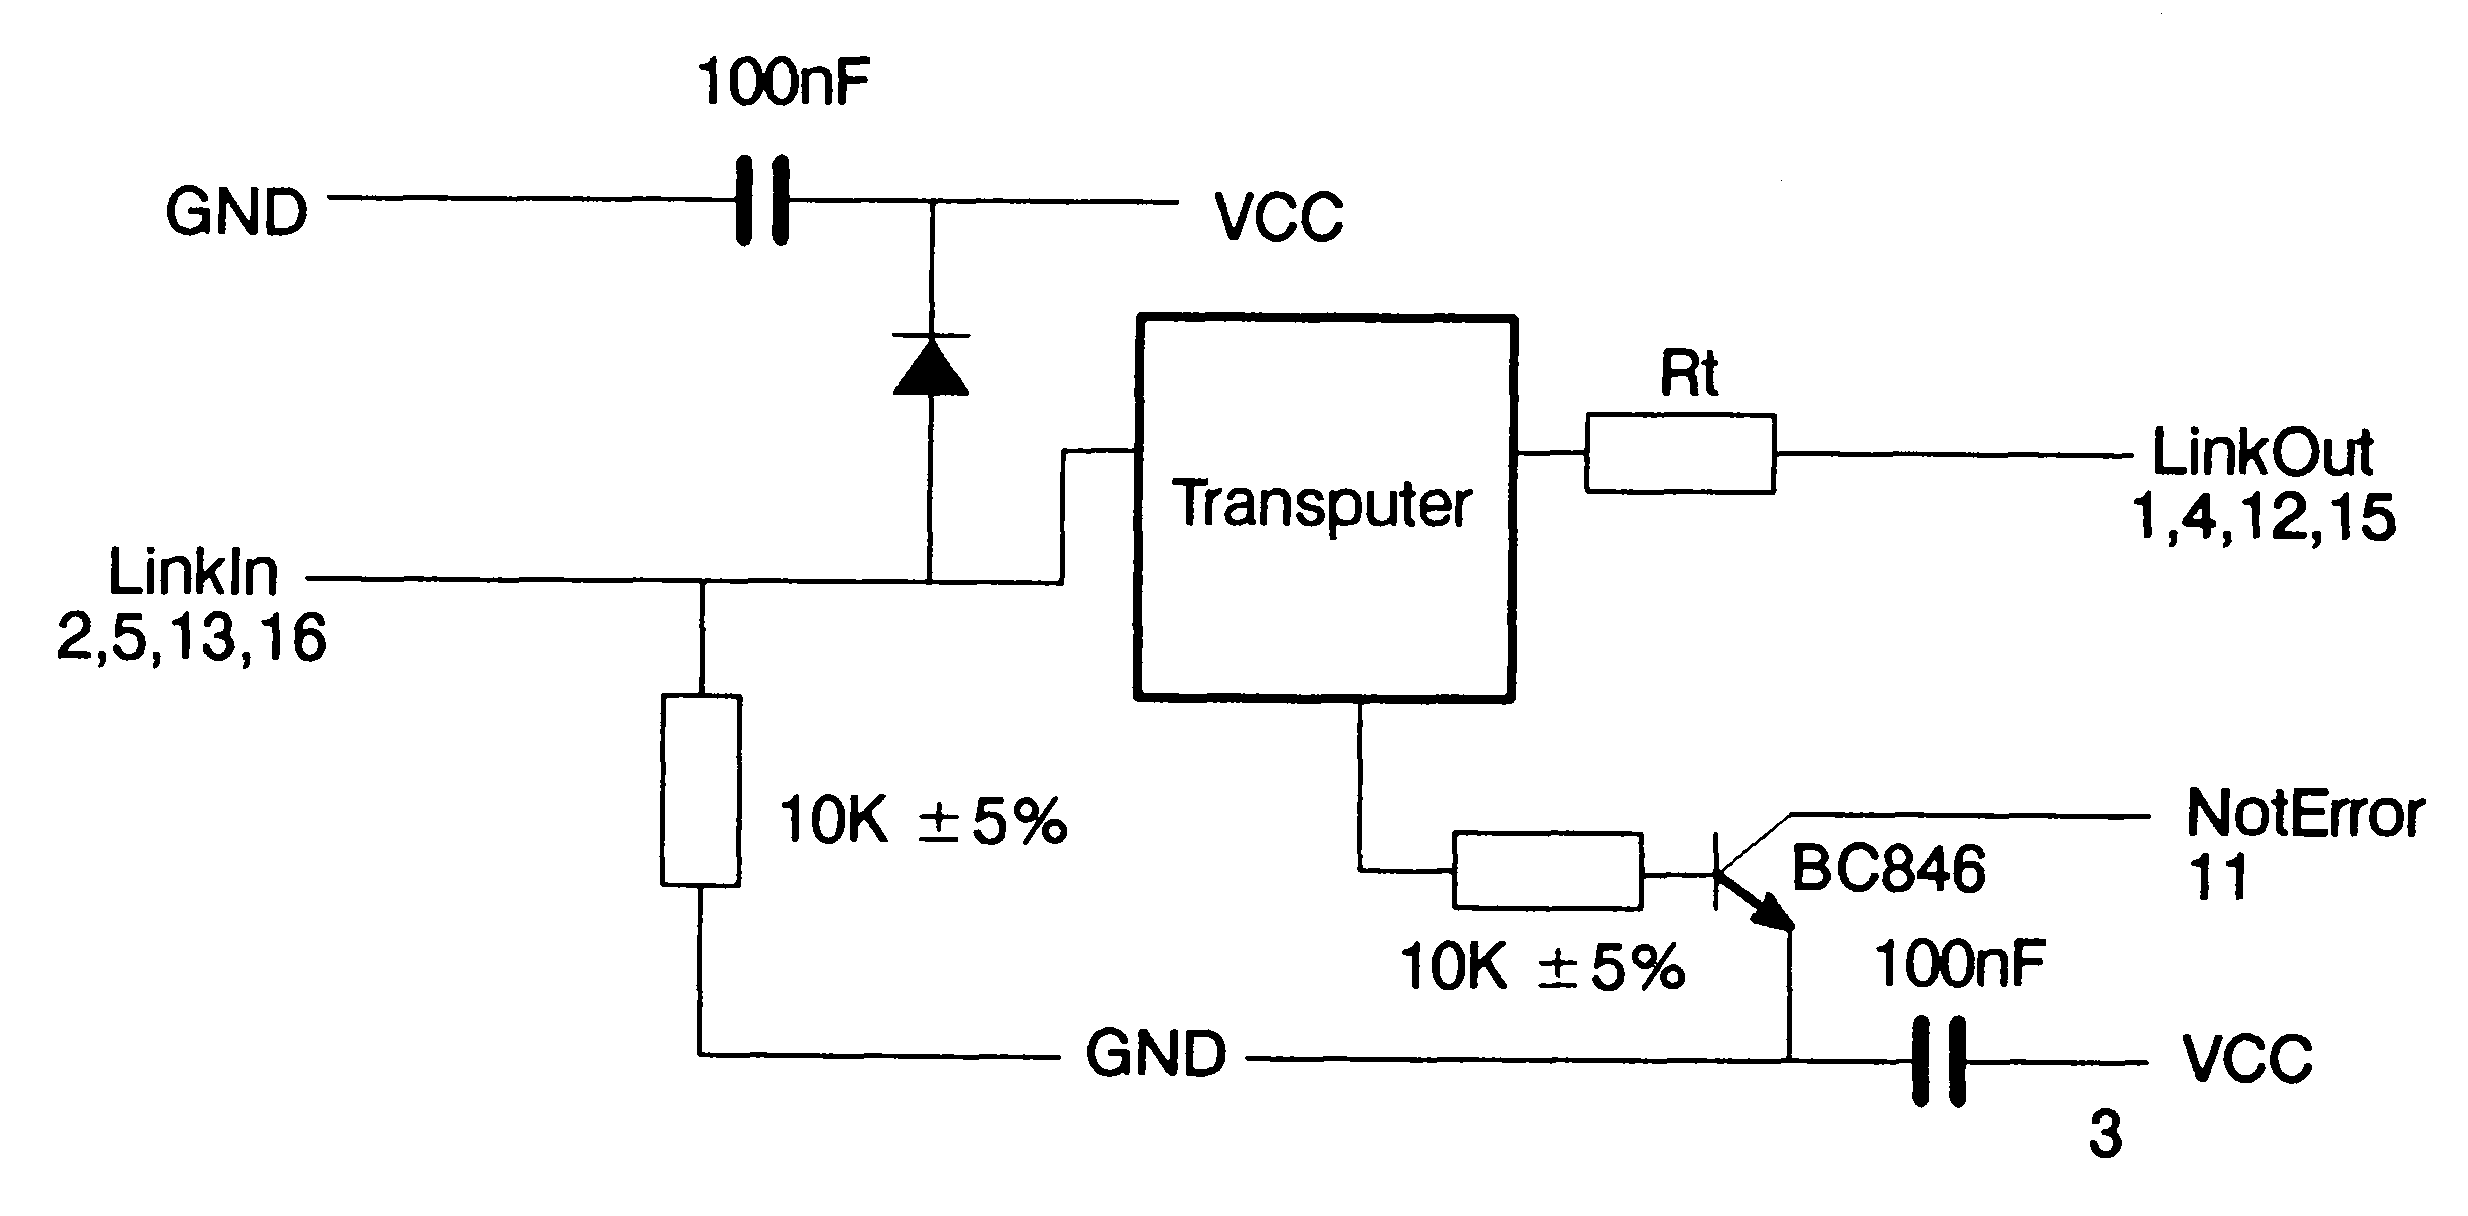 Recommended
circuit between TRAM pins and transputer